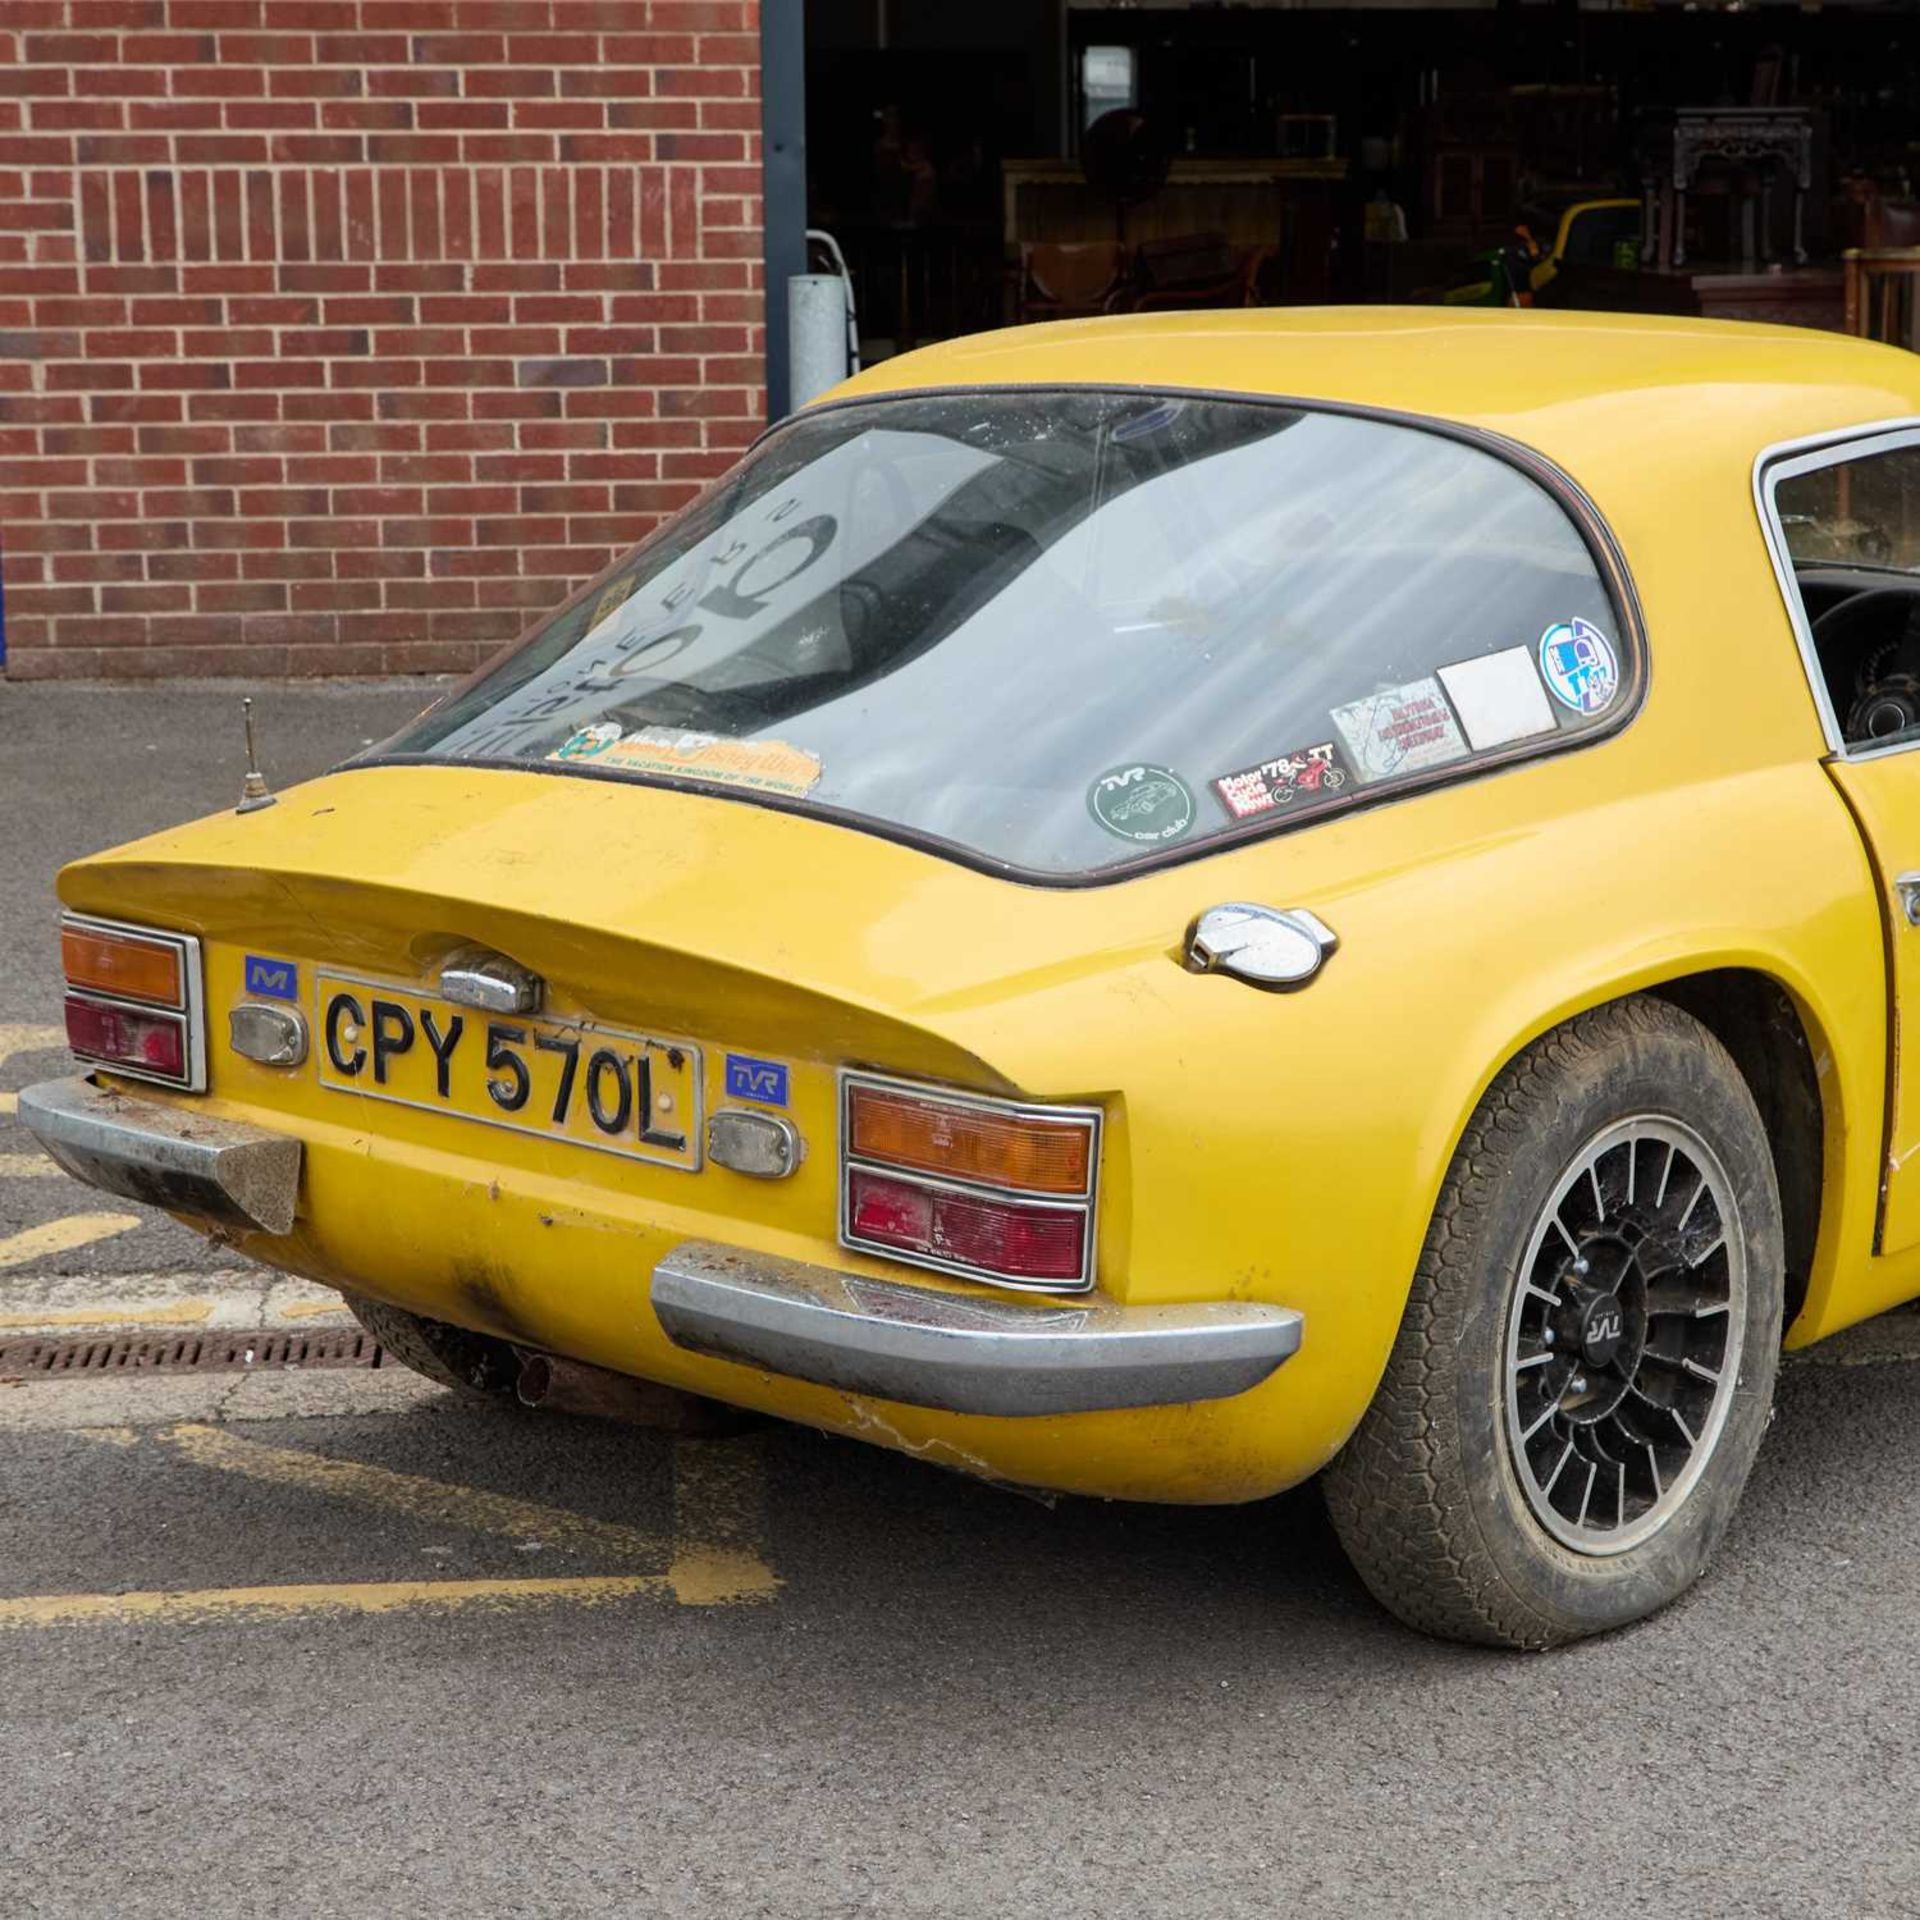 A 1973 TVR - Image 18 of 27